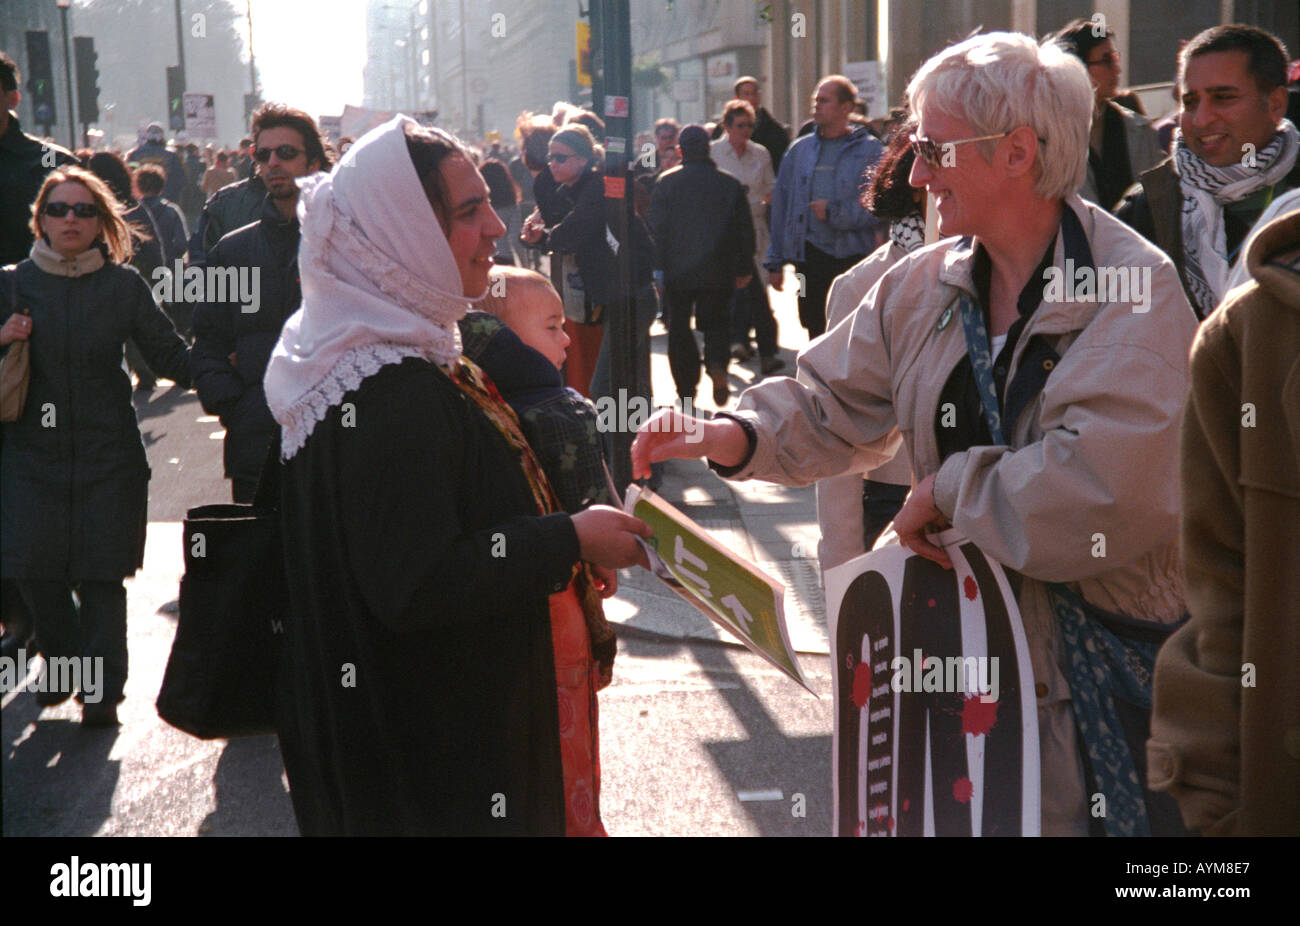 Demonstration against the war in Iraq in March 2003 in London Woman buying a Big Issue from a woman with a child in her arms Stock Photo